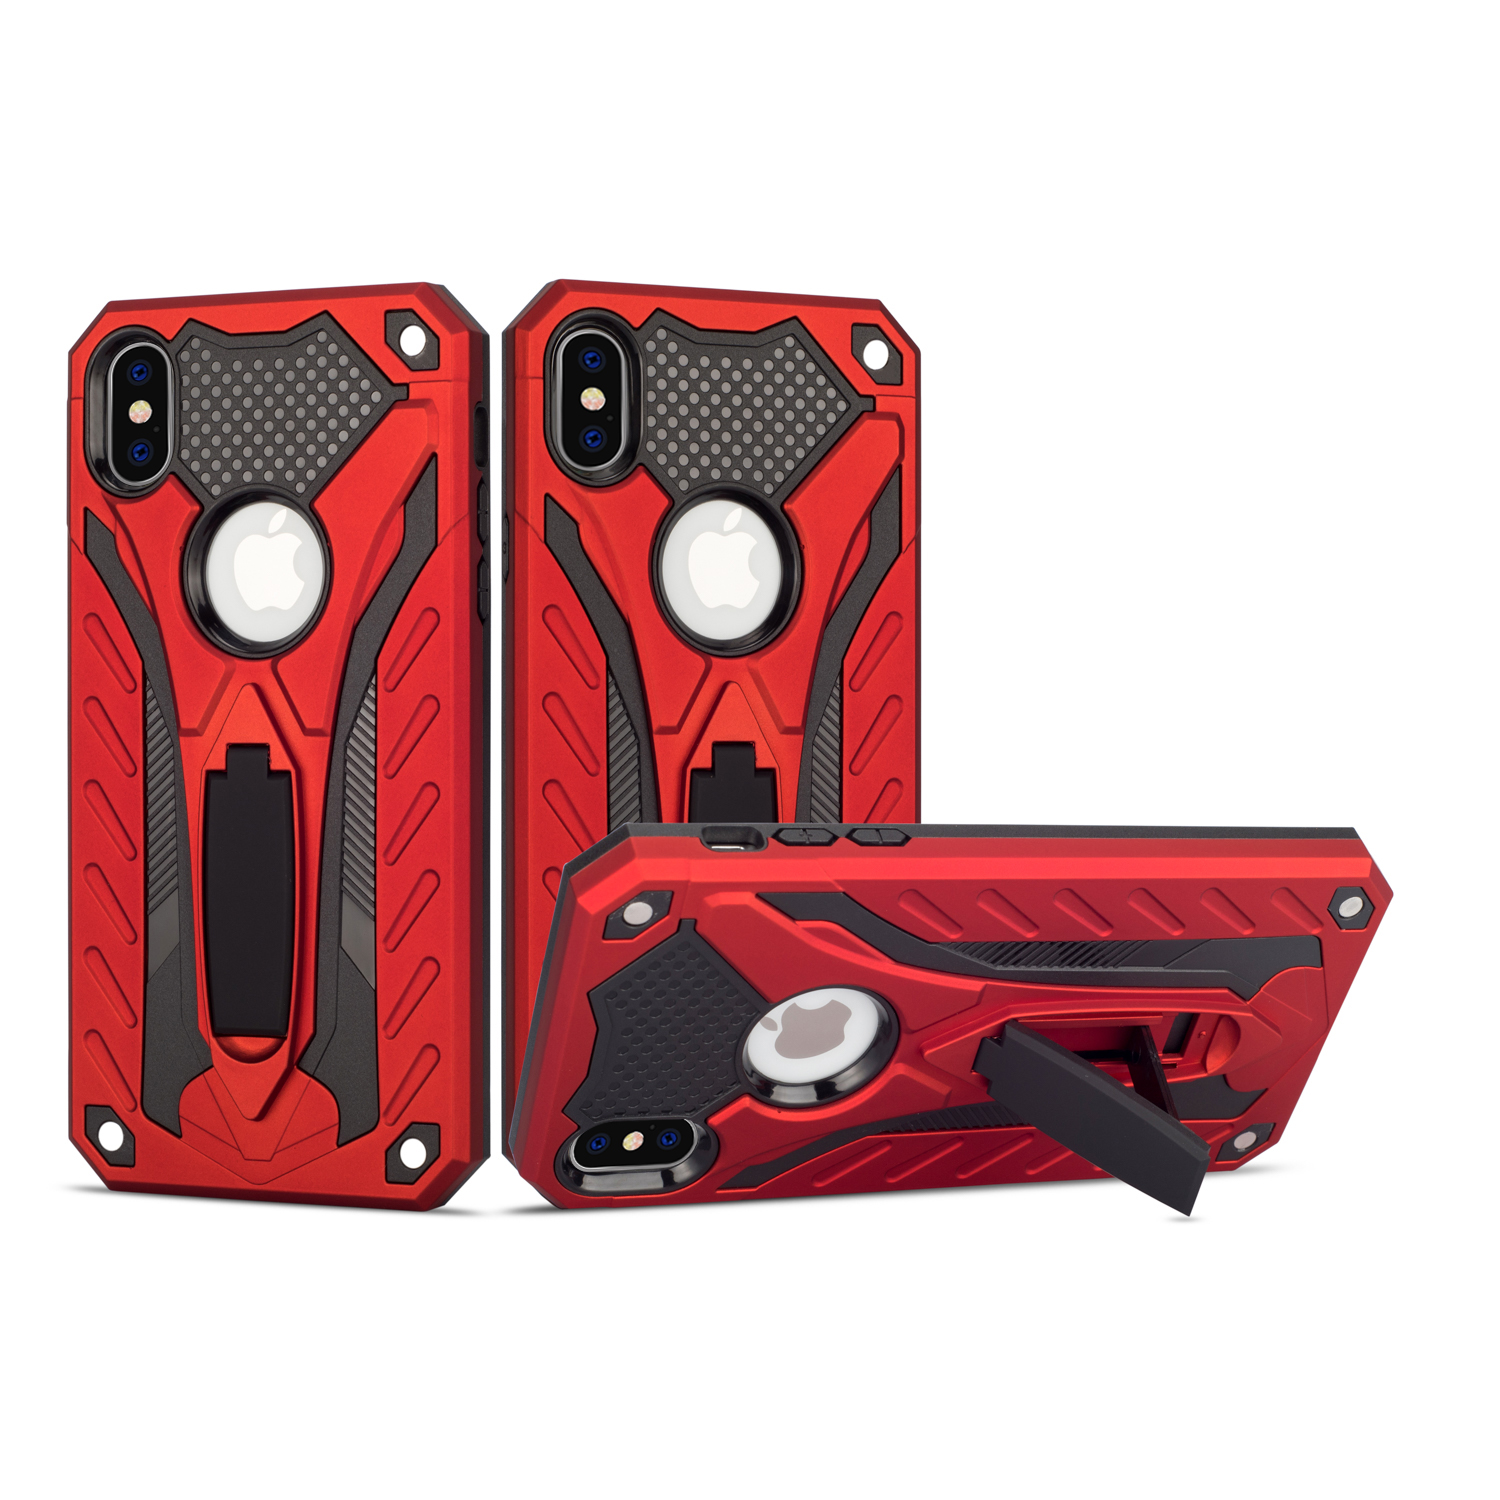 iPHONE Xs Max Armor Knight Kickstand Hybrid Case (Red)